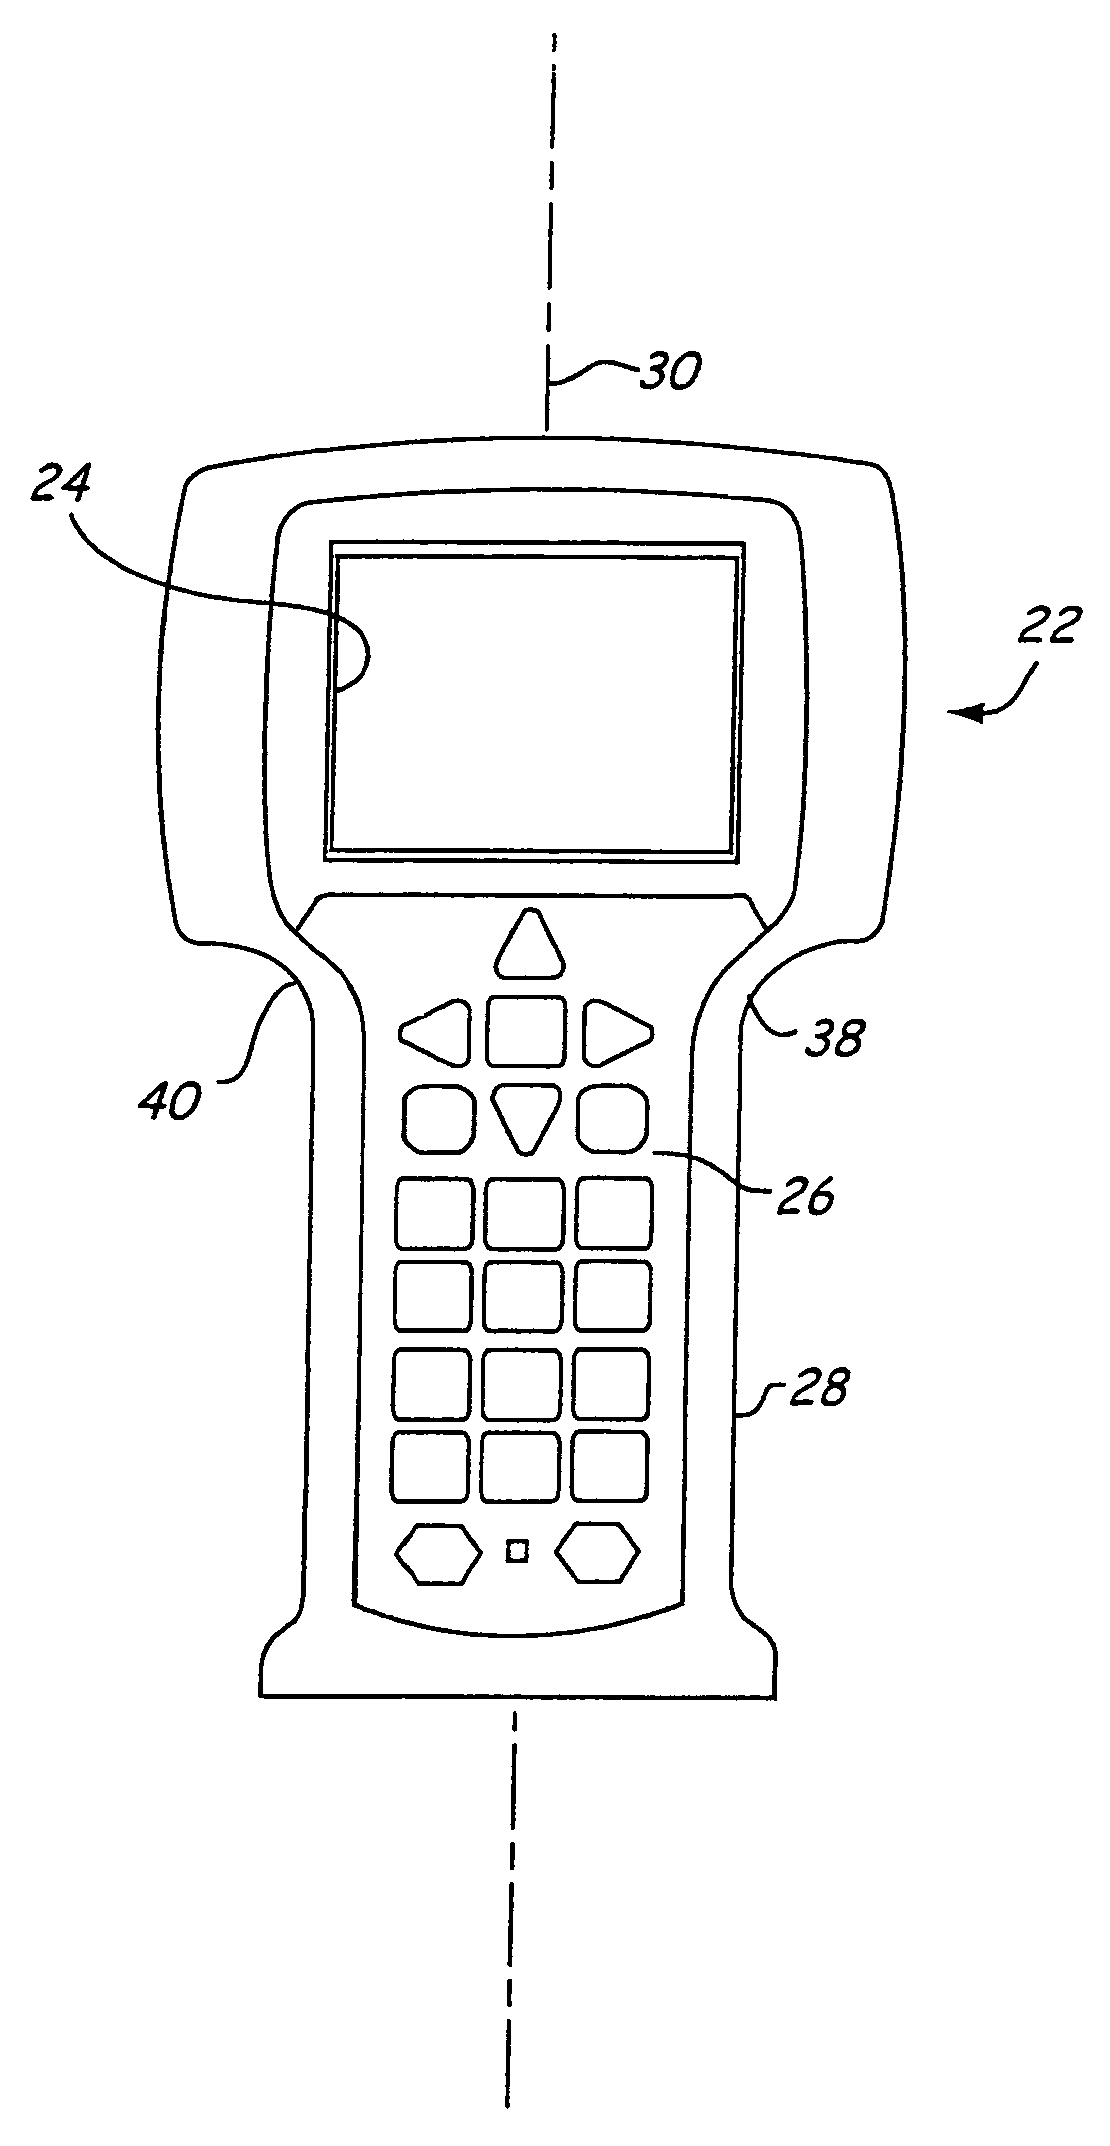 One-handed operation of a handheld field maintenance tool